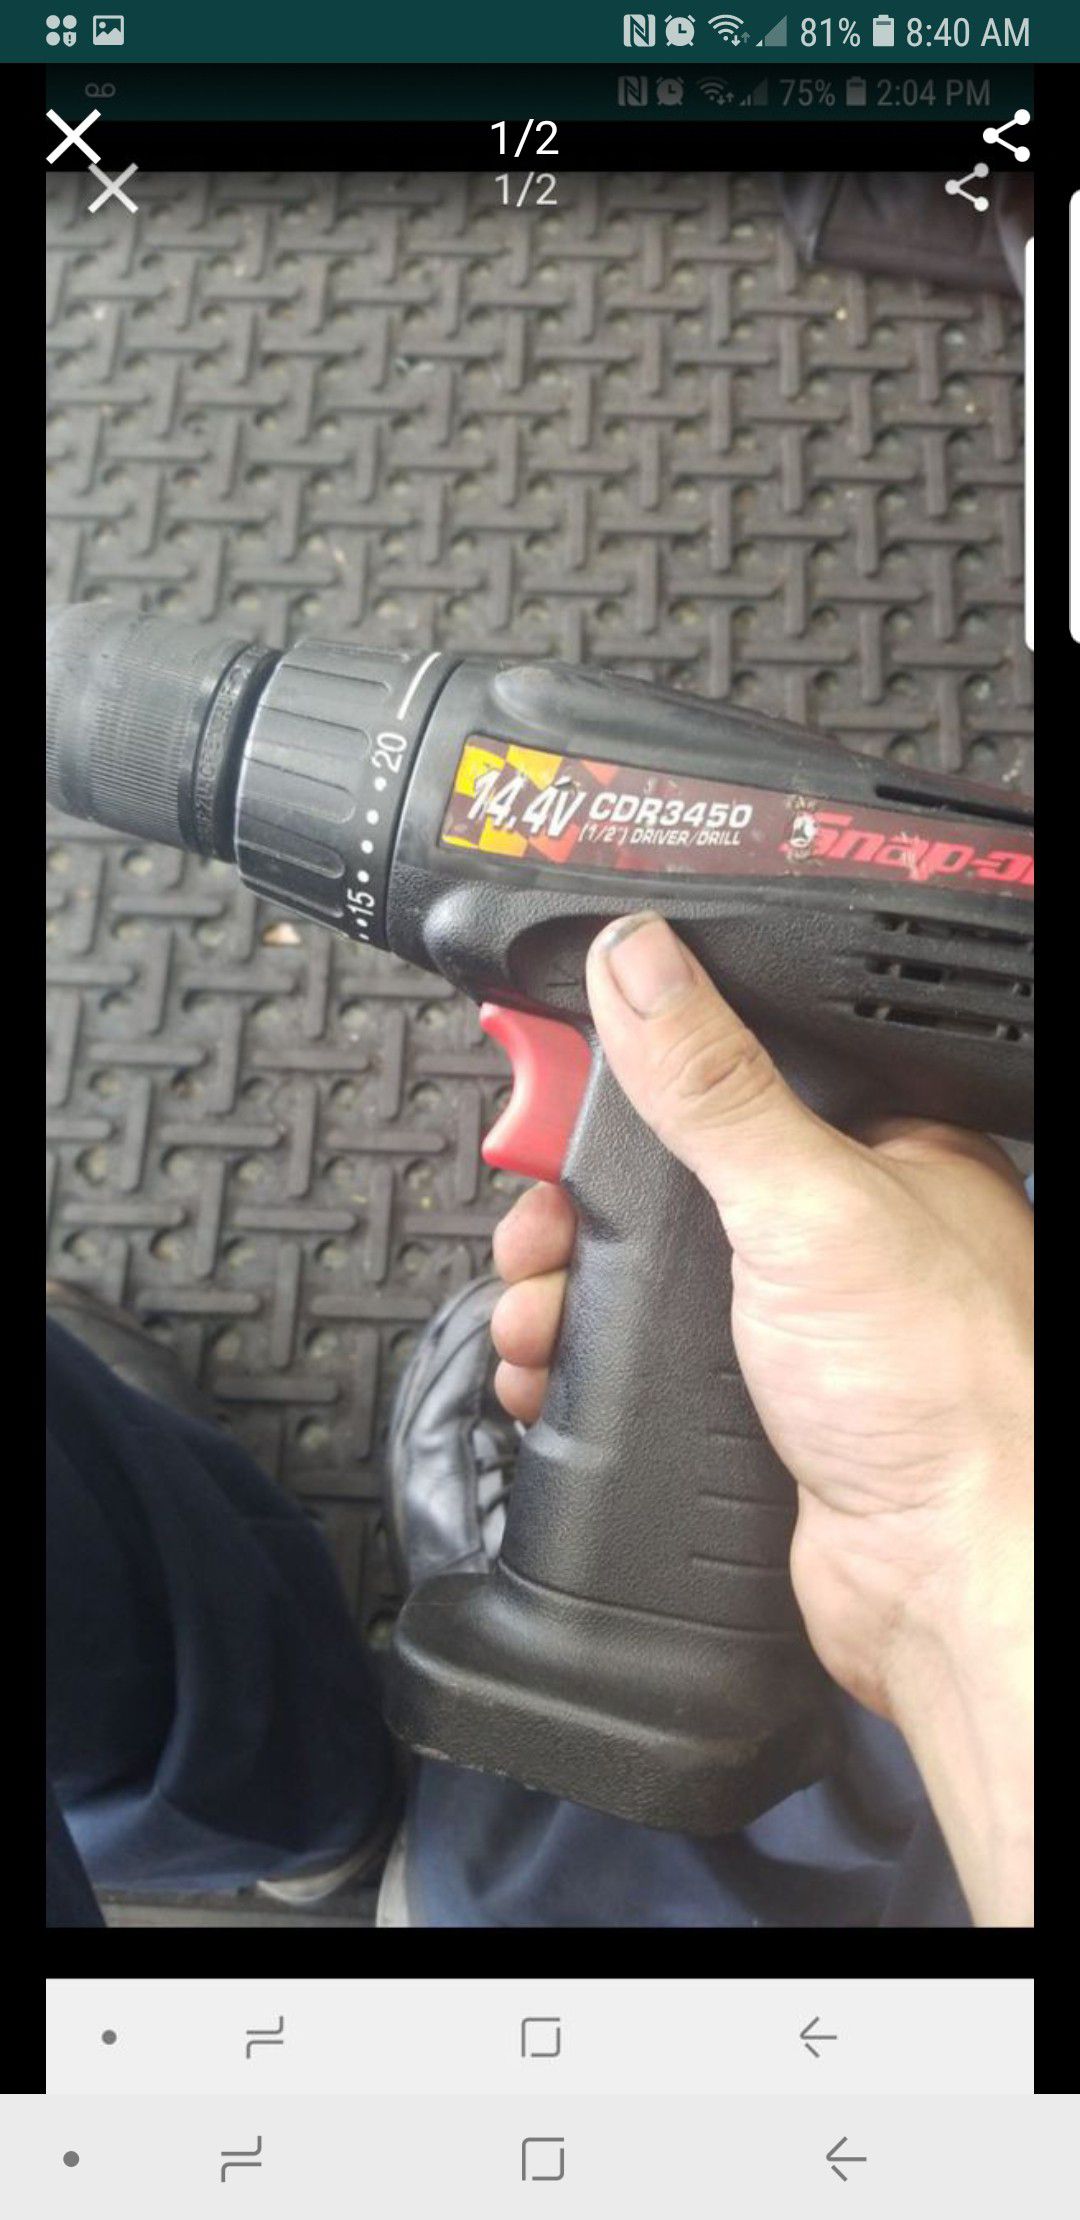 Snap on drill